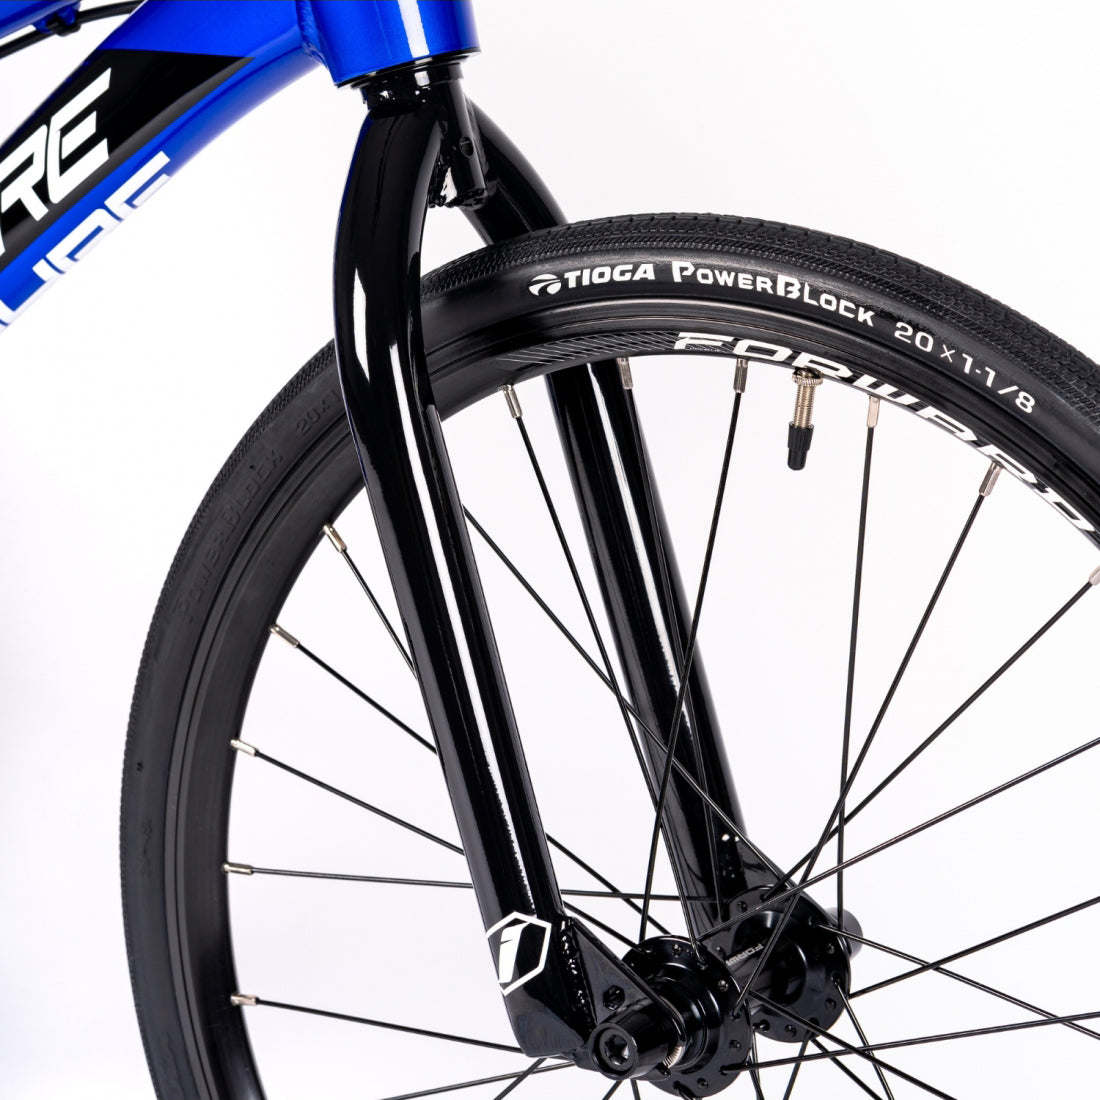 A blue and black Inspyre Evo Disc Expert Bike is shown against a white background.